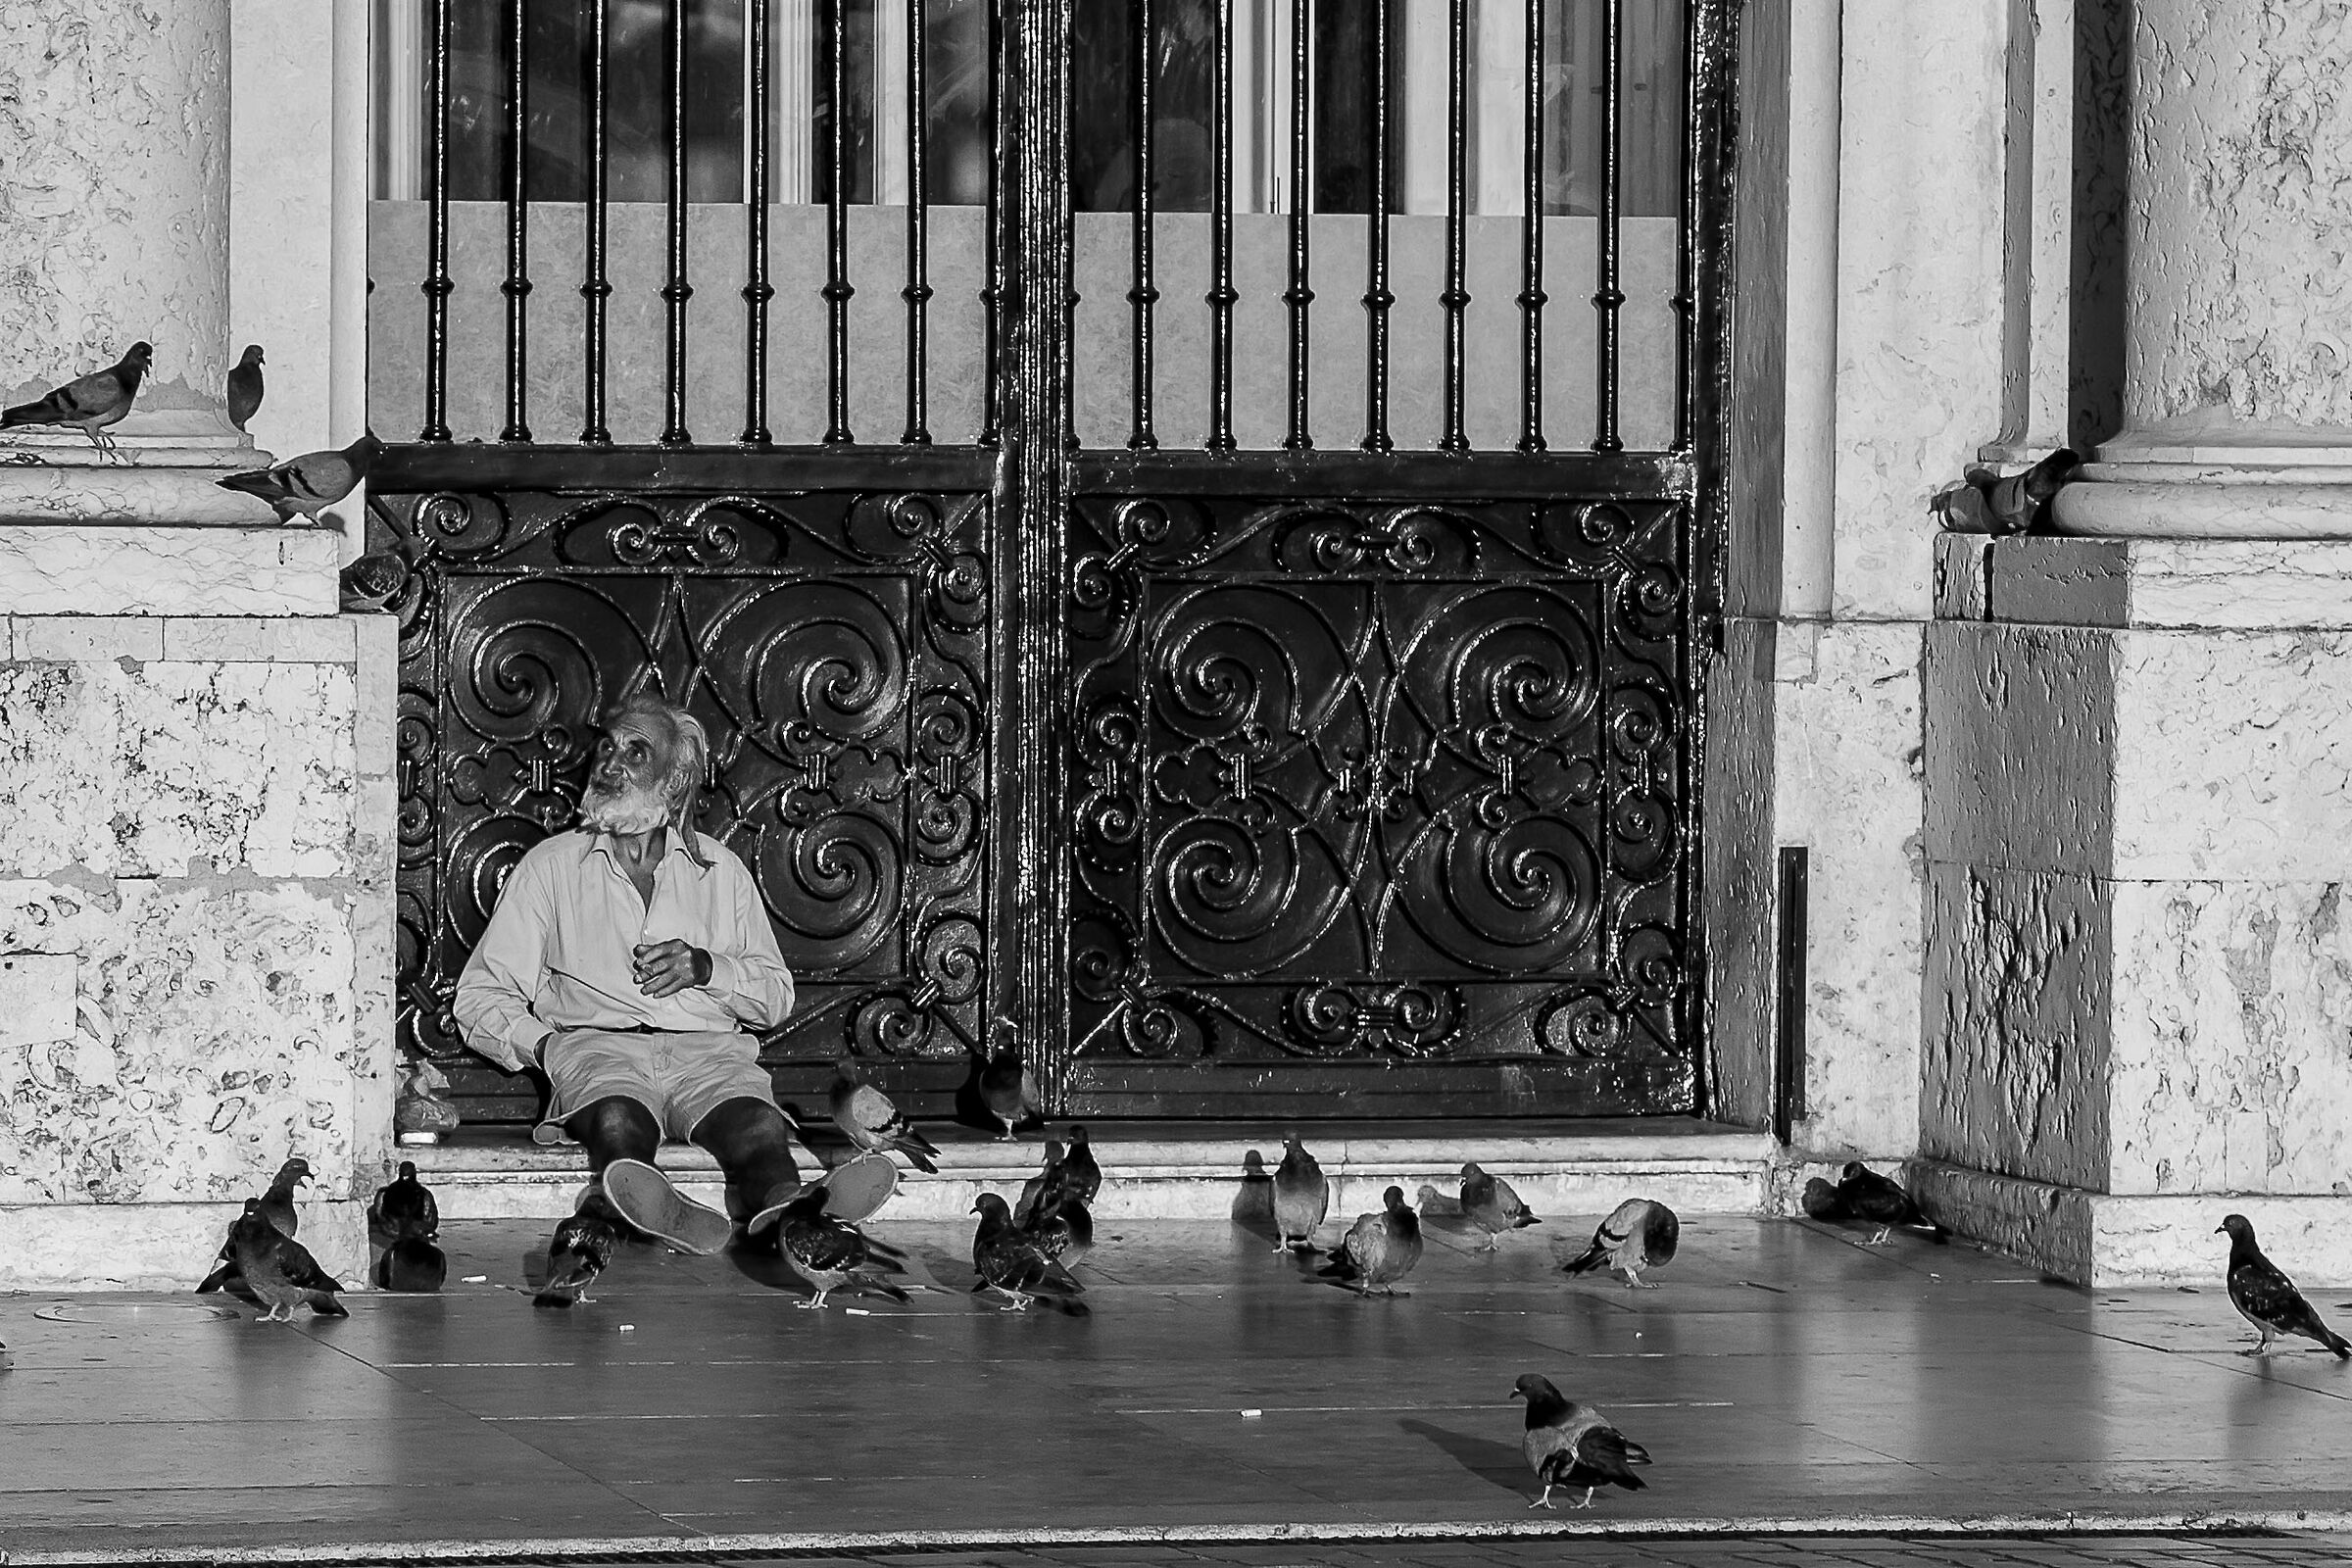 The man who whispers to the pigeons....